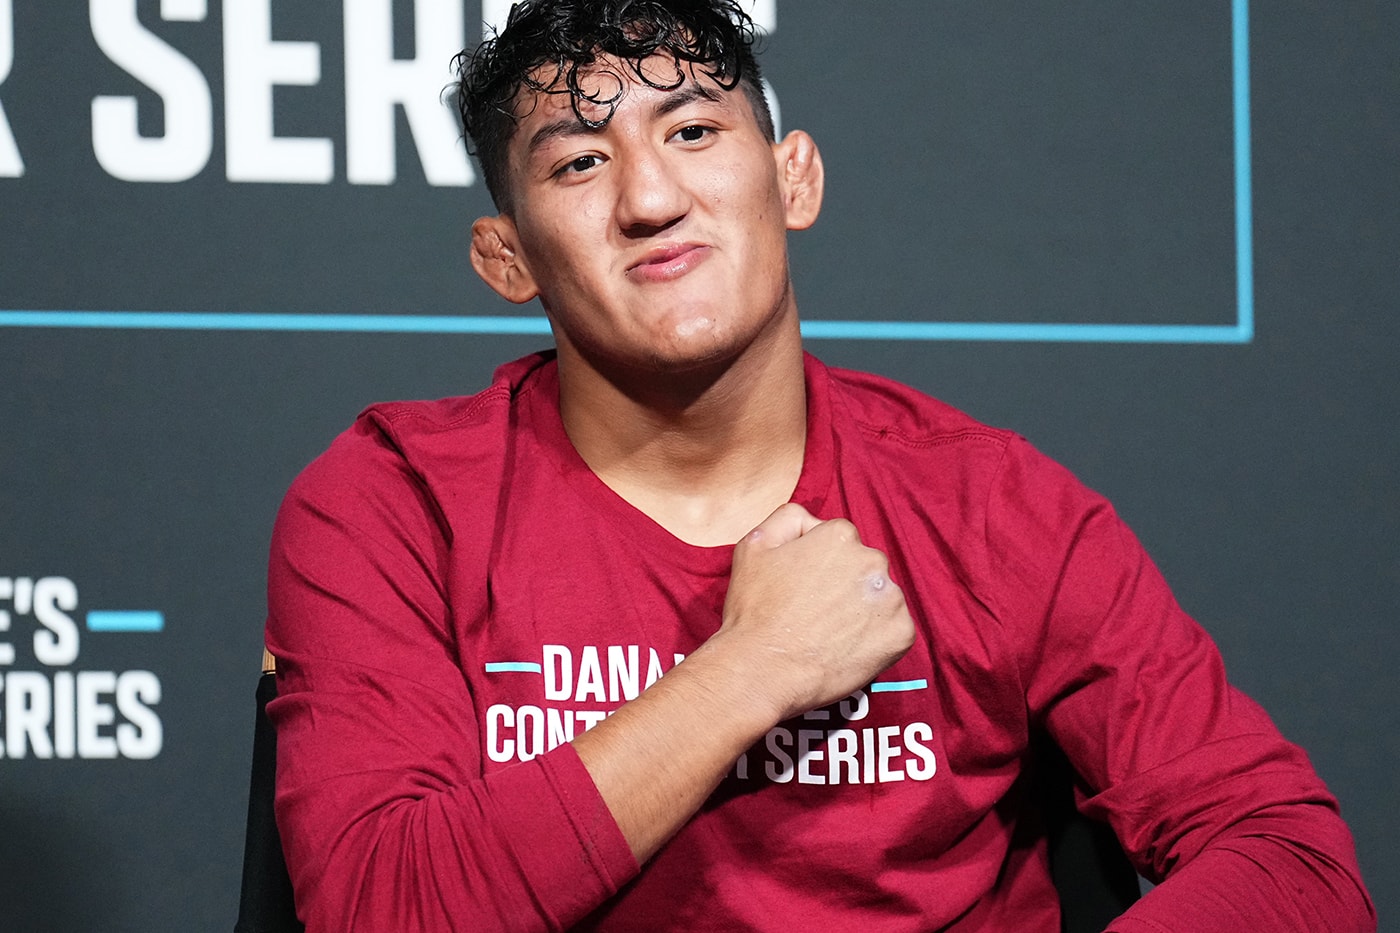 He has the most KOs in the UFC : r/ufc